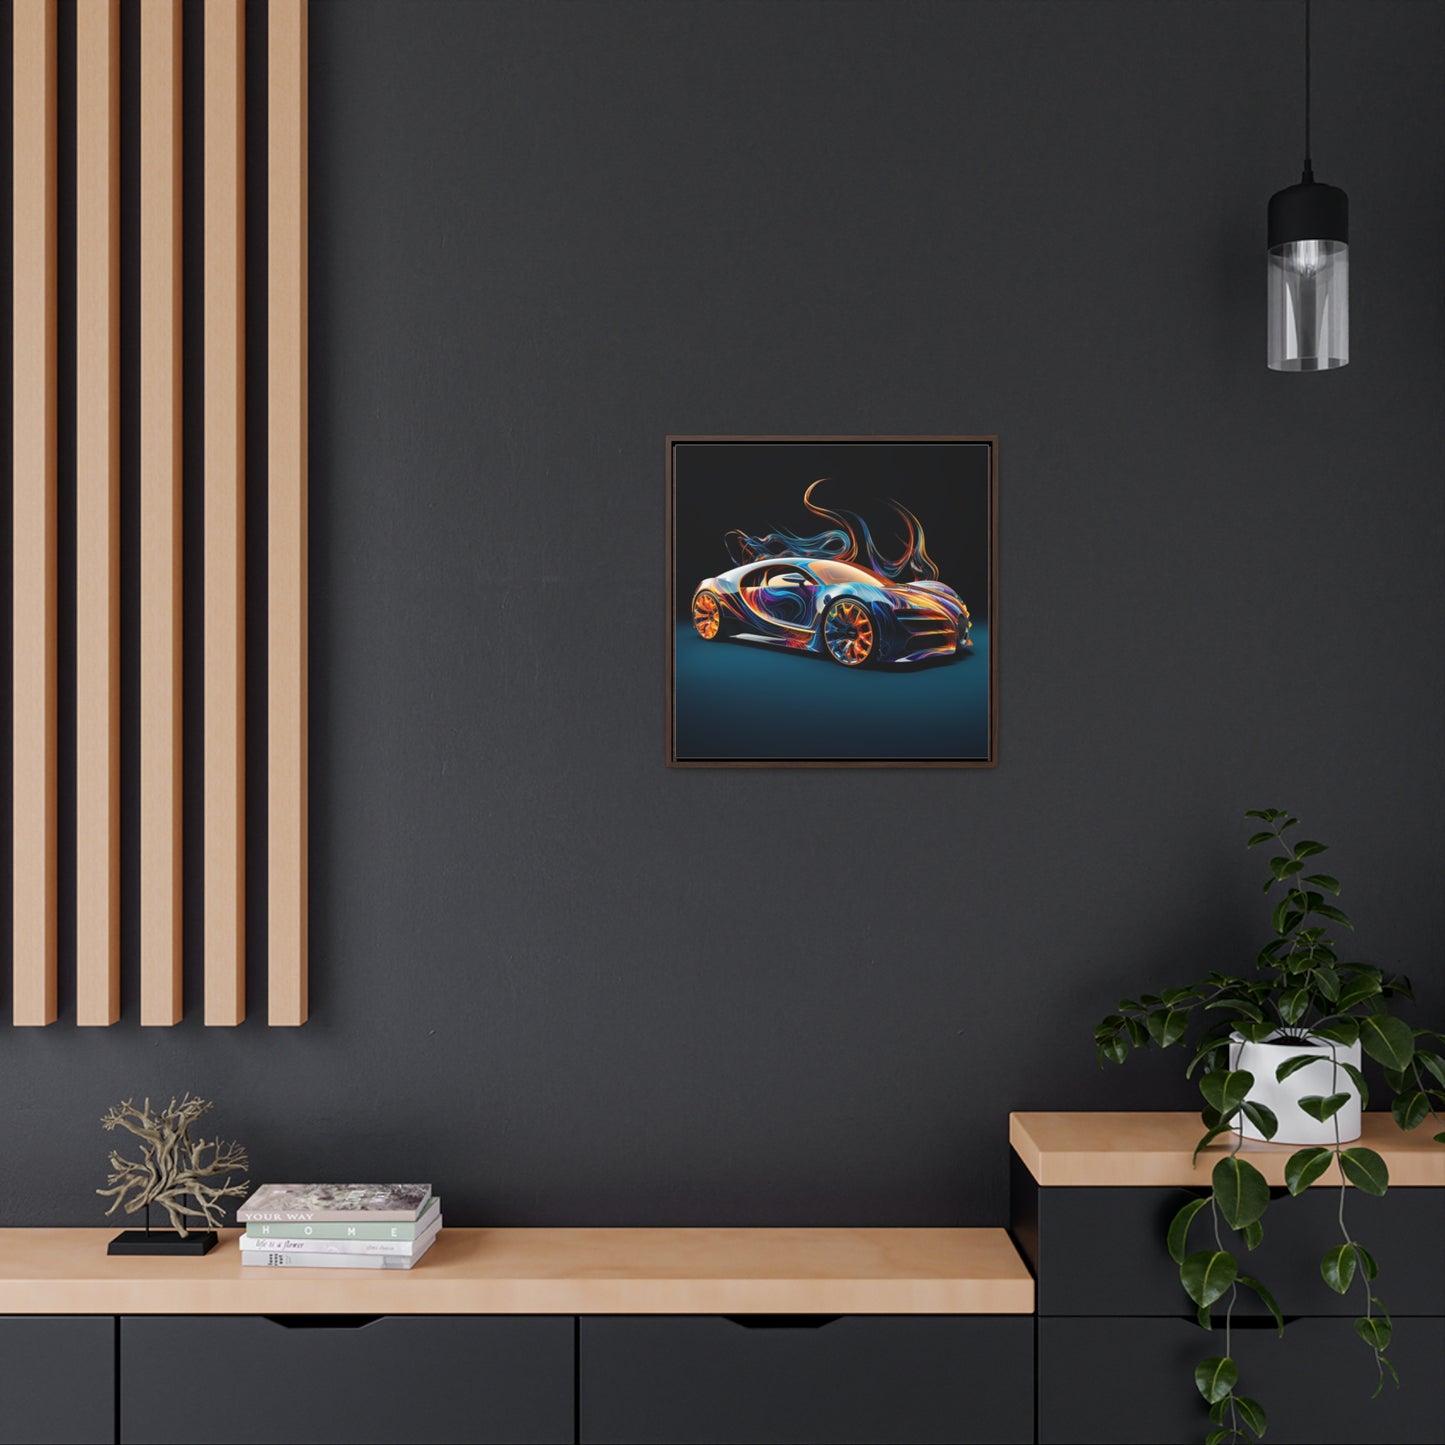 Gallery Canvas Wraps, Square Frame Bugatti Abstract Flair 2